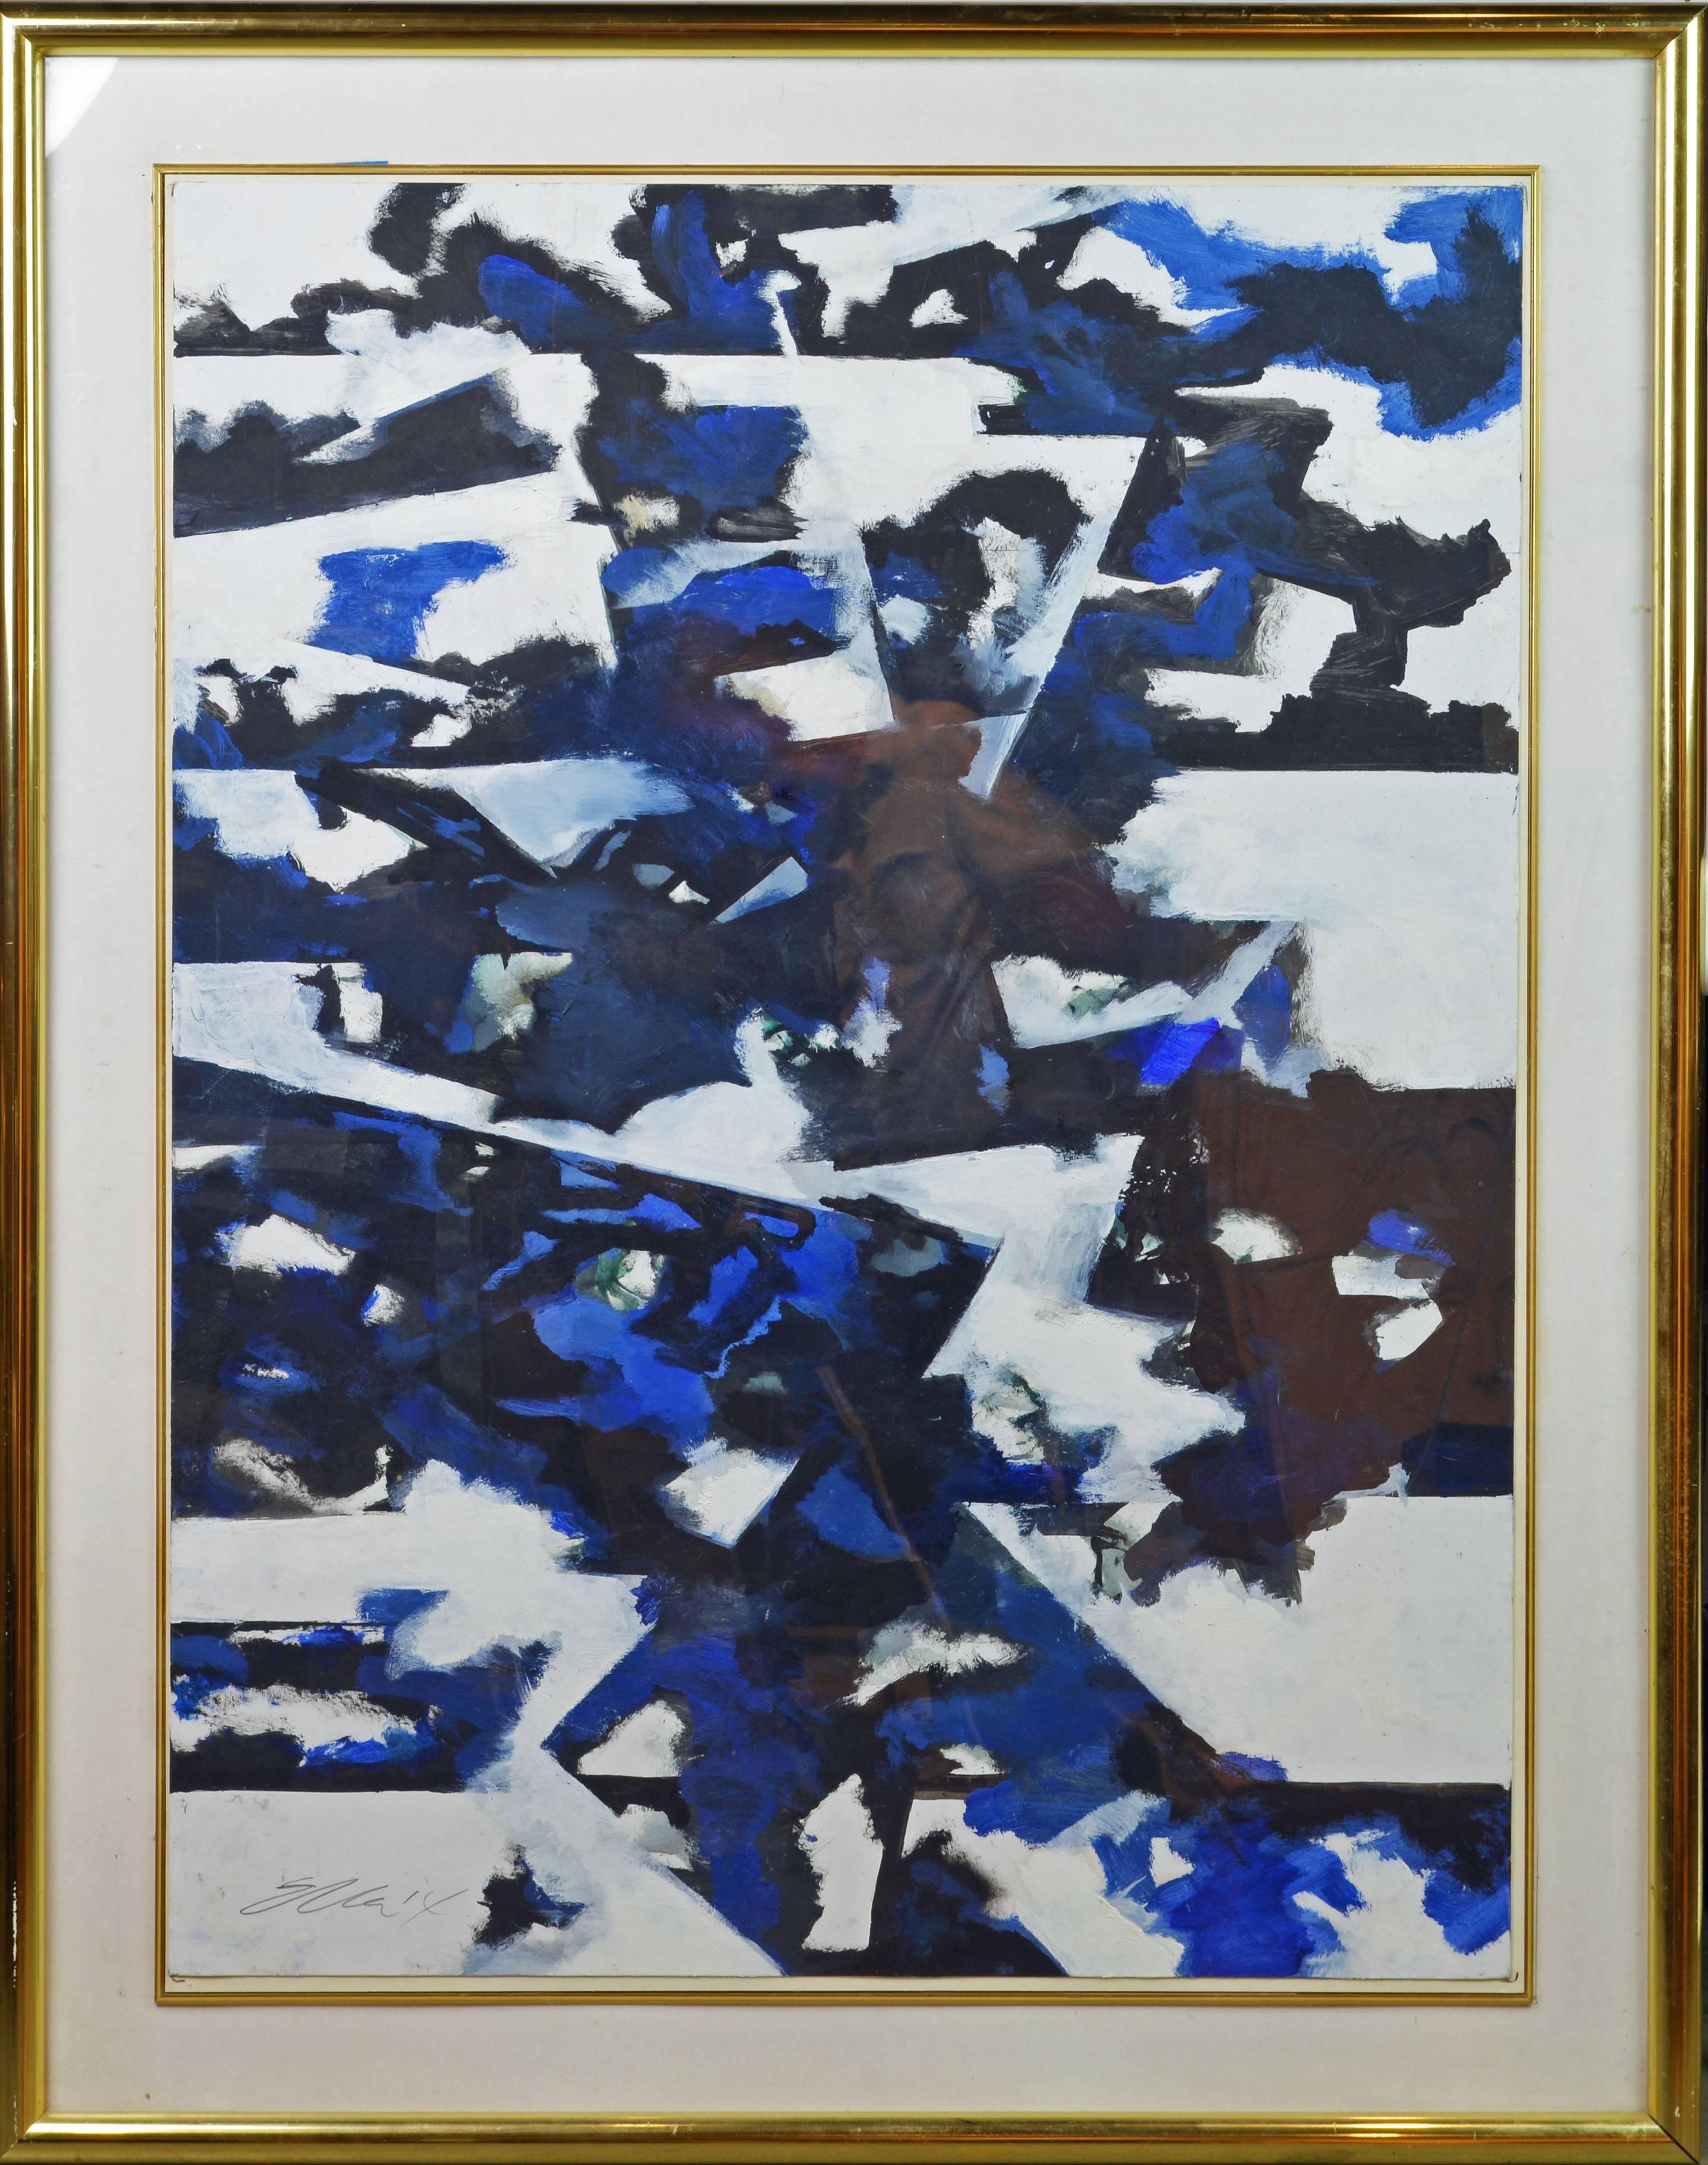 'Blue Composition'
By Ed Eller, American 20th century.30 x 40 in. without frame, 38.25 x 48 in. including frame.
Oil on arches paper, signed.
Housed in a modern gold finish fra with protective glas and matting.

Ed Eller personal statement:
I